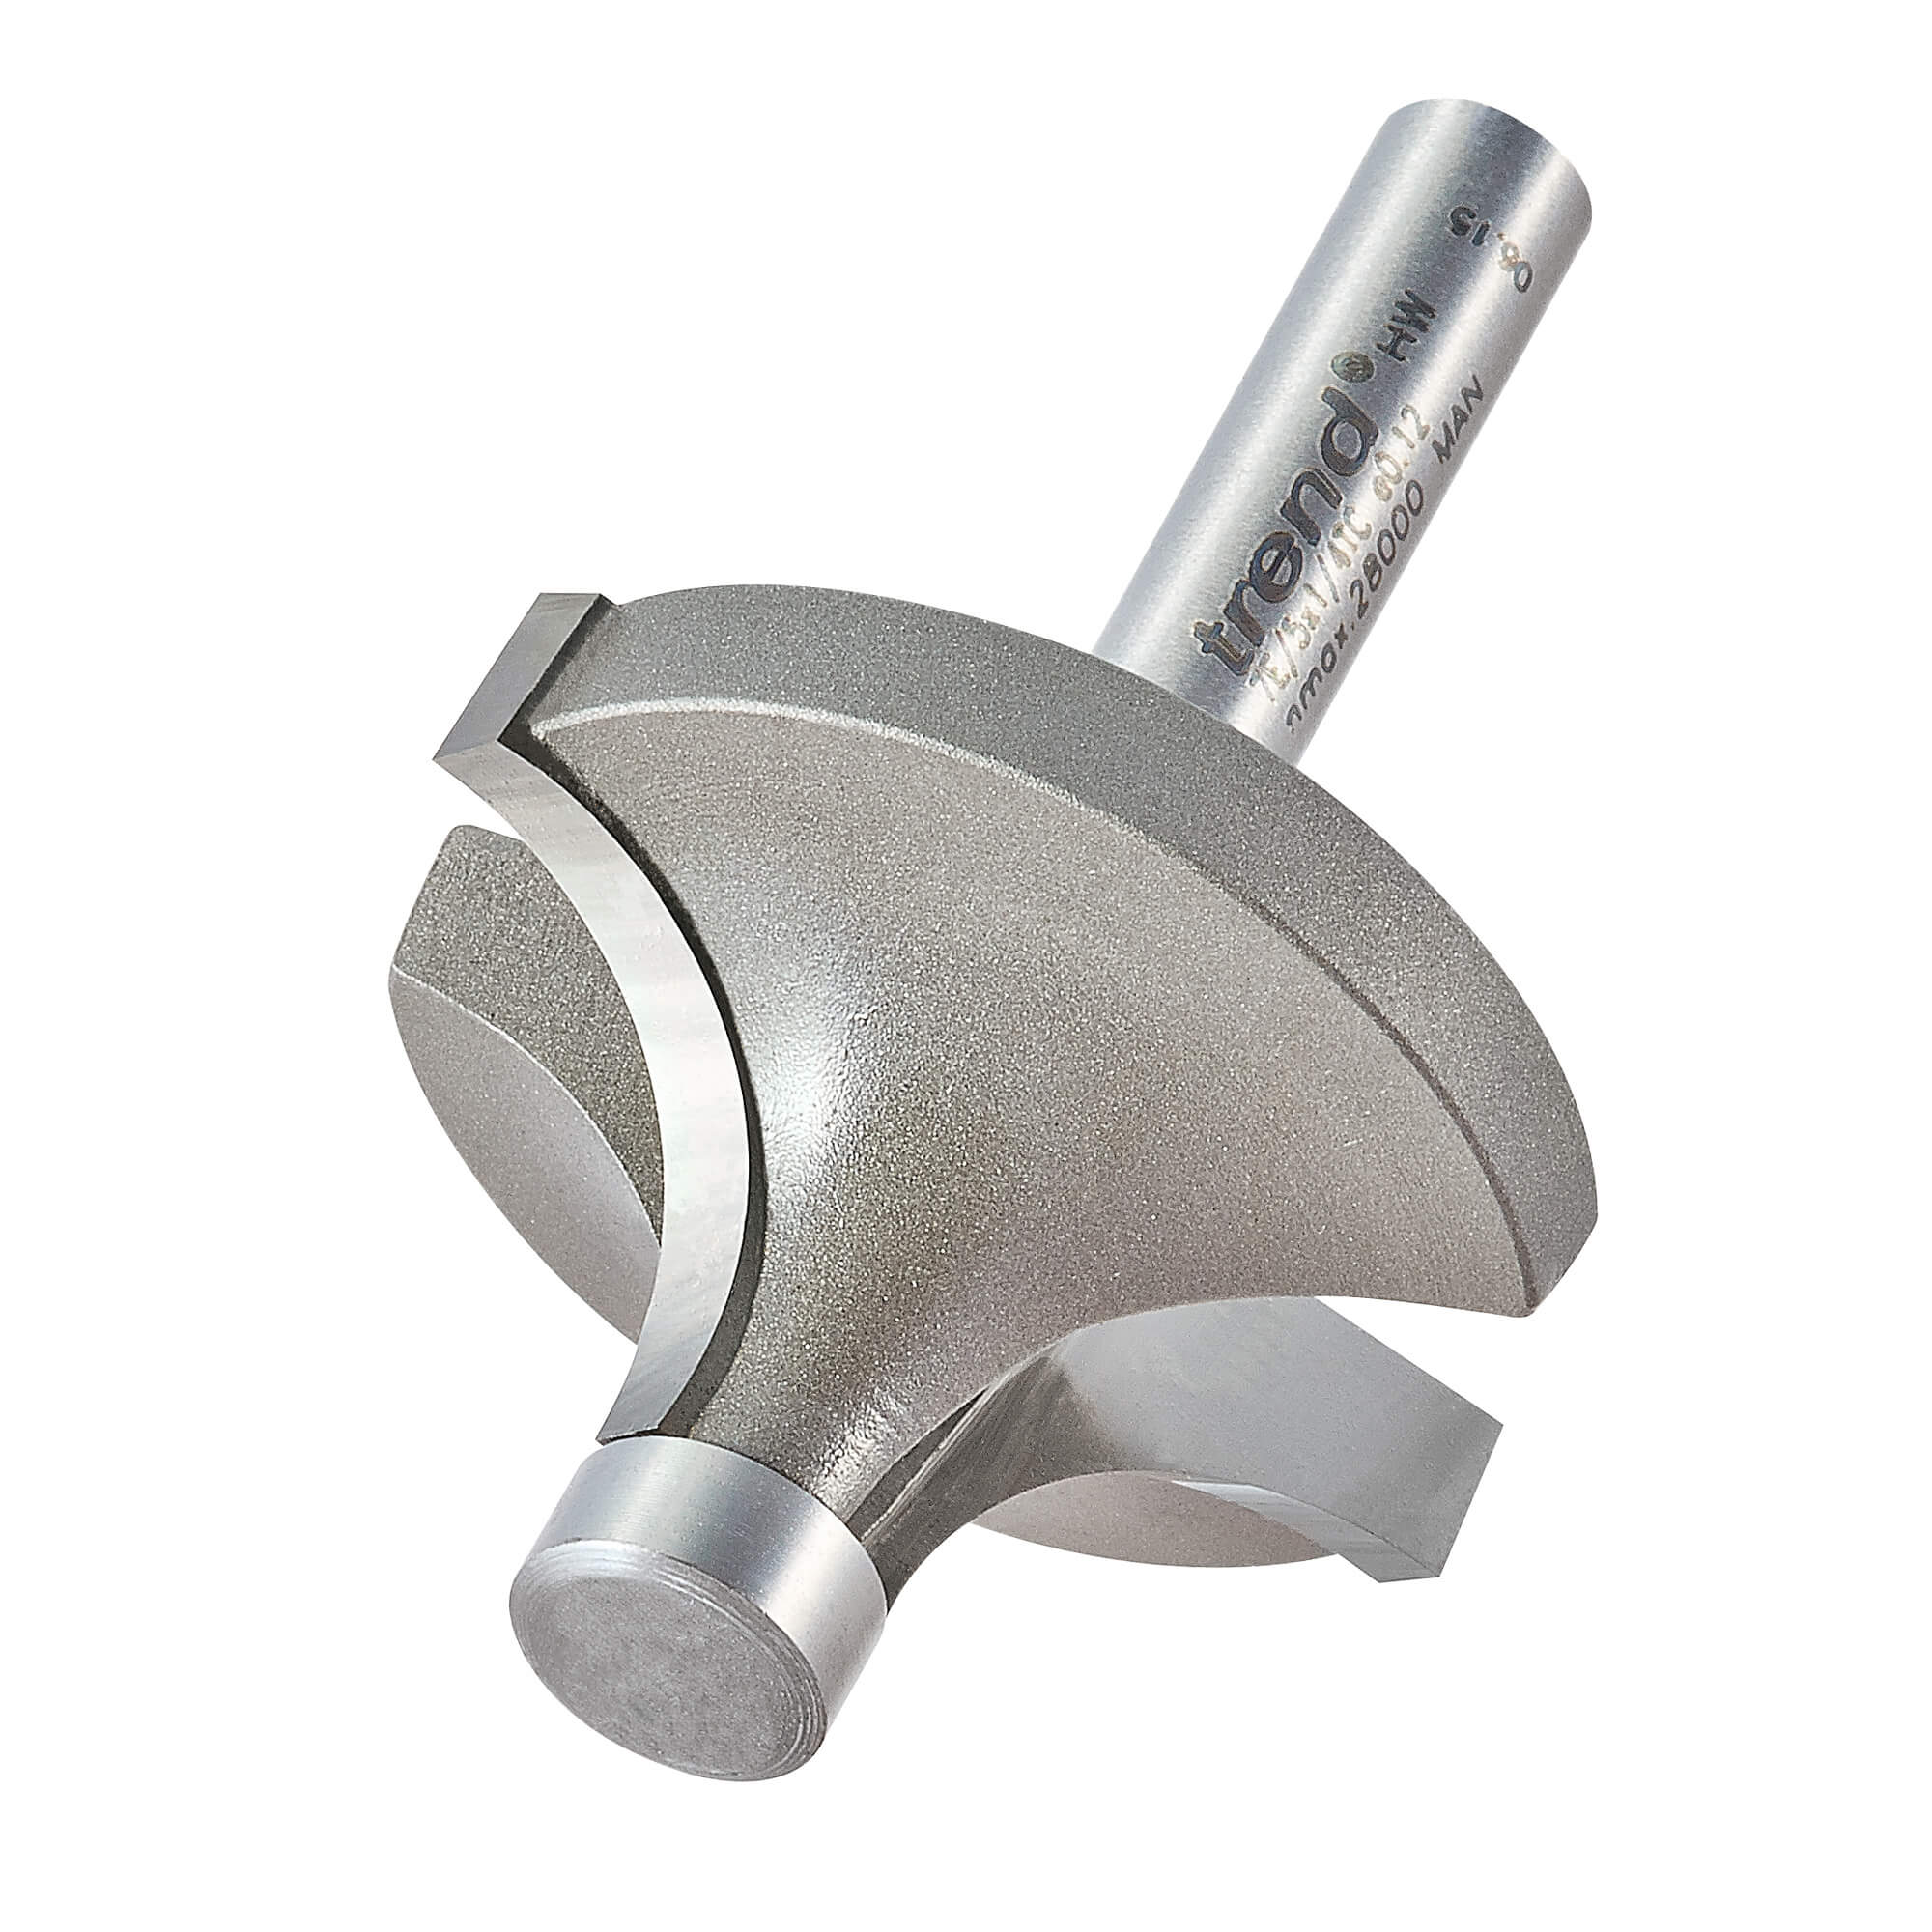 Image of Trend Pin Guided Round Over Router Cutter 34.4mm 19mm 1/4"